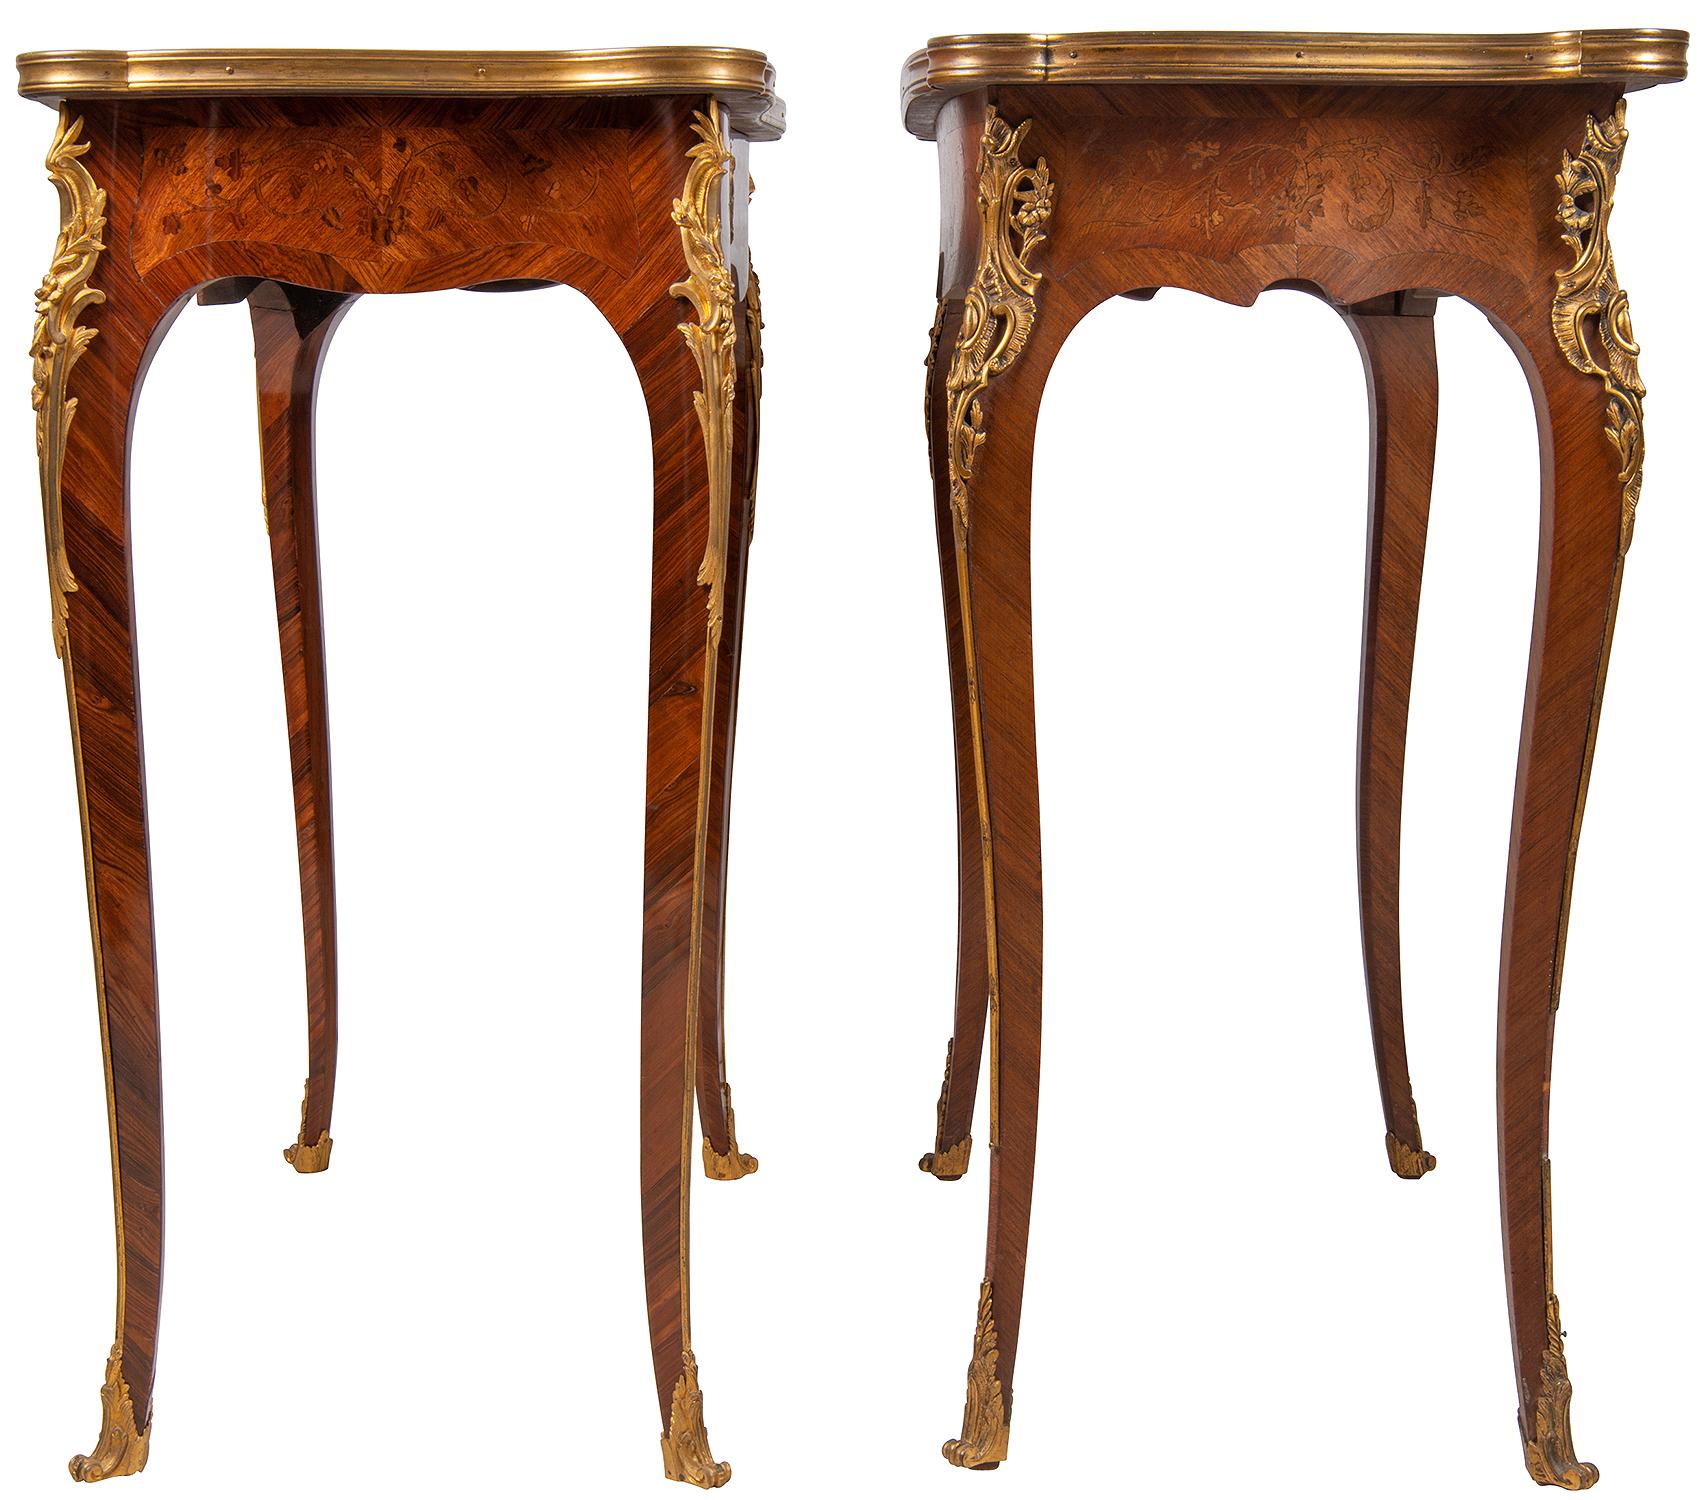 French Near Pair of Linke Influenced Louis XVI Style Side Tables, Late 19th Century